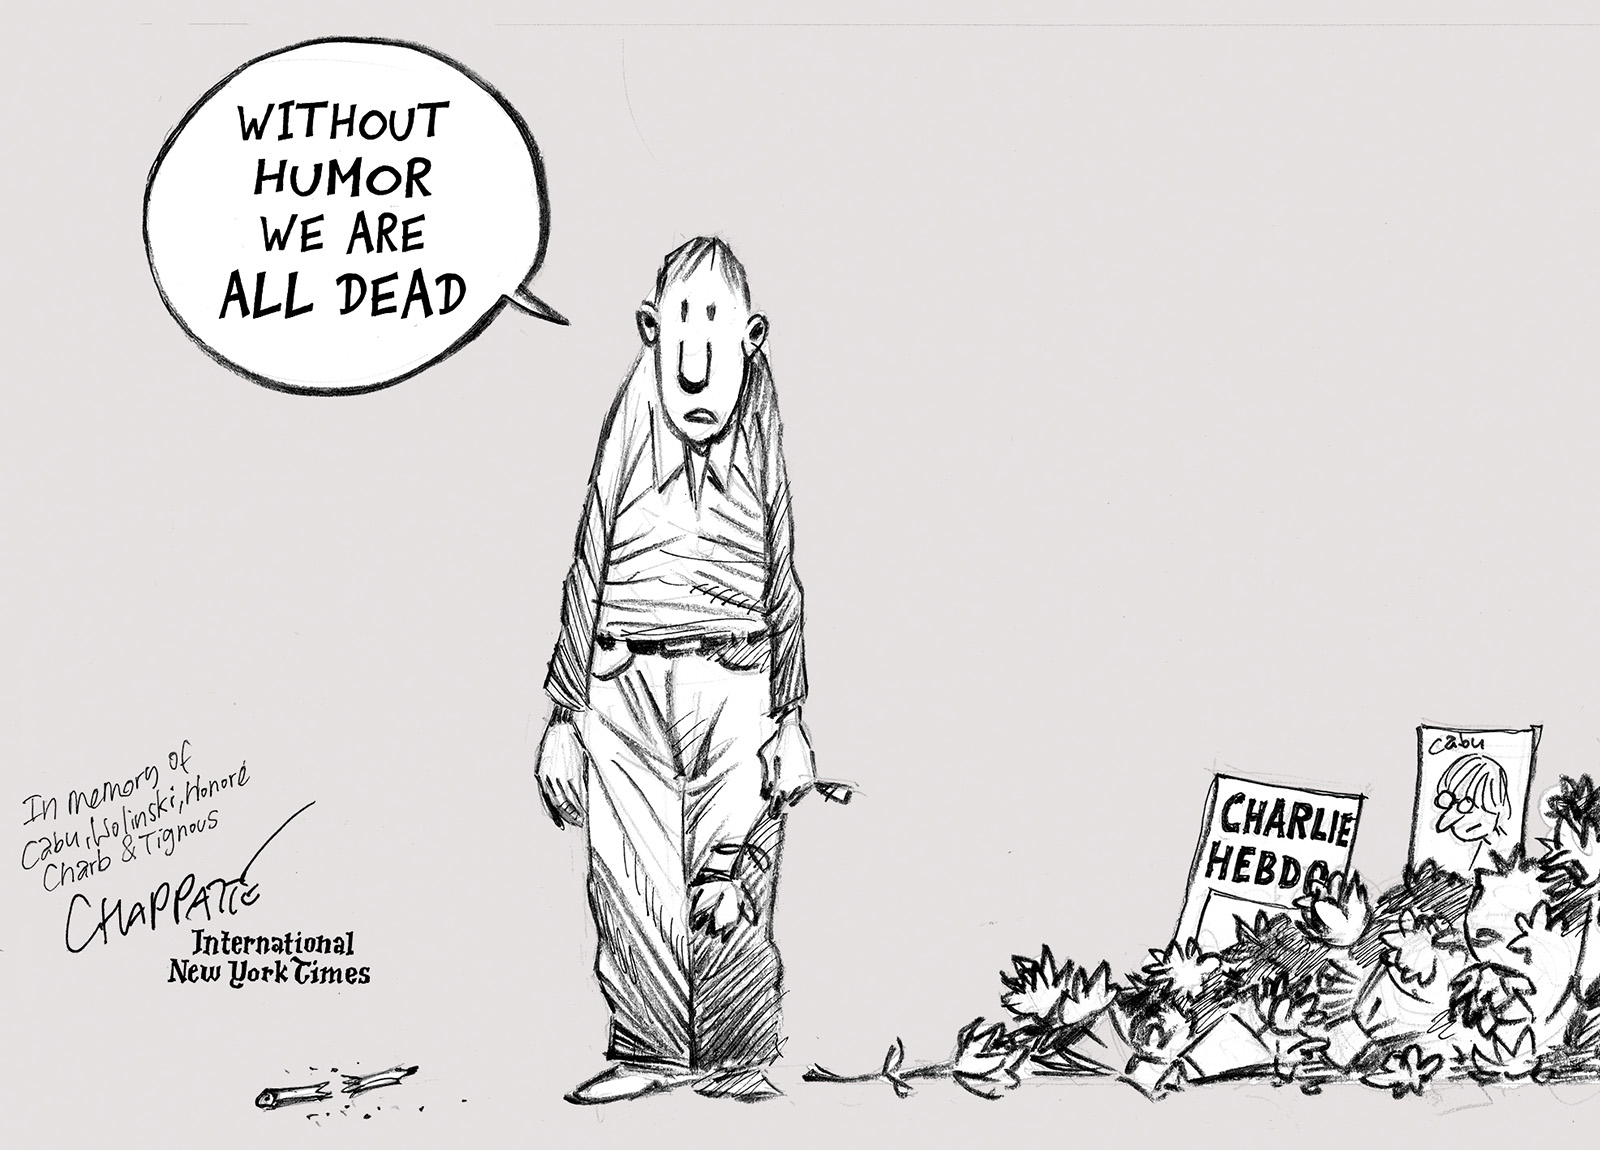 Cartoon published by the NYT after the Charlie Hebdo massacre